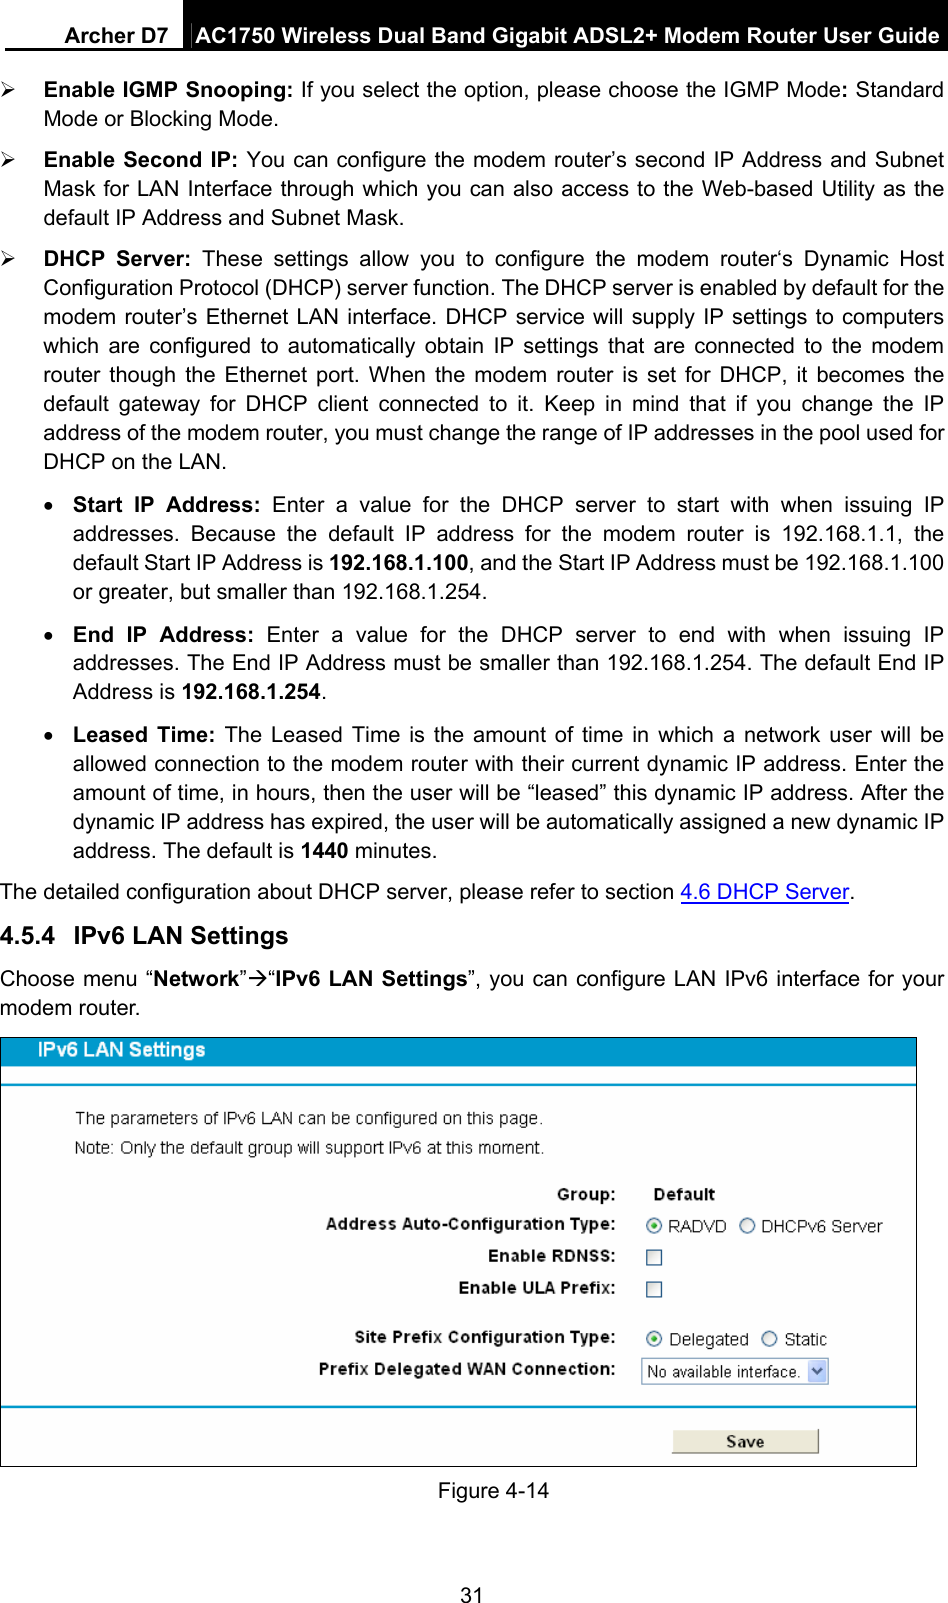 Archer D7  AC1750 Wireless Dual Band Gigabit ADSL2+ Modem Router User Guide 31  Enable IGMP Snooping: If you select the option, please choose the IGMP Mode: Standard Mode or Blocking Mode.  Enable Second IP: You can configure the modem router’s second IP Address and Subnet Mask for LAN Interface through which you can also access to the Web-based Utility as the default IP Address and Subnet Mask.  DHCP Server: These settings allow you to configure the modem router‘s Dynamic Host Configuration Protocol (DHCP) server function. The DHCP server is enabled by default for the modem router’s Ethernet LAN interface. DHCP service will supply IP settings to computers which are configured to automatically obtain IP settings that are connected to the modem router though the Ethernet port. When the modem router is set for DHCP, it becomes the default gateway for DHCP client connected to it. Keep in mind that if you change the IP address of the modem router, you must change the range of IP addresses in the pool used for DHCP on the LAN.  Start IP Address: Enter a value for the DHCP server to start with when issuing IP addresses. Because the default IP address for the modem router is 192.168.1.1, the default Start IP Address is 192.168.1.100, and the Start IP Address must be 192.168.1.100 or greater, but smaller than 192.168.1.254.  End IP Address: Enter a value for the DHCP server to end with when issuing IP addresses. The End IP Address must be smaller than 192.168.1.254. The default End IP Address is 192.168.1.254.  Leased Time: The Leased Time is the amount of time in which a network user will be allowed connection to the modem router with their current dynamic IP address. Enter the amount of time, in hours, then the user will be “leased” this dynamic IP address. After the dynamic IP address has expired, the user will be automatically assigned a new dynamic IP address. The default is 1440 minutes. The detailed configuration about DHCP server, please refer to section 4.6 DHCP Server. 4.5.4  IPv6 LAN Settings Choose menu “Network”“IPv6 LAN Settings”, you can configure LAN IPv6 interface for your modem router.  Figure 4-14 